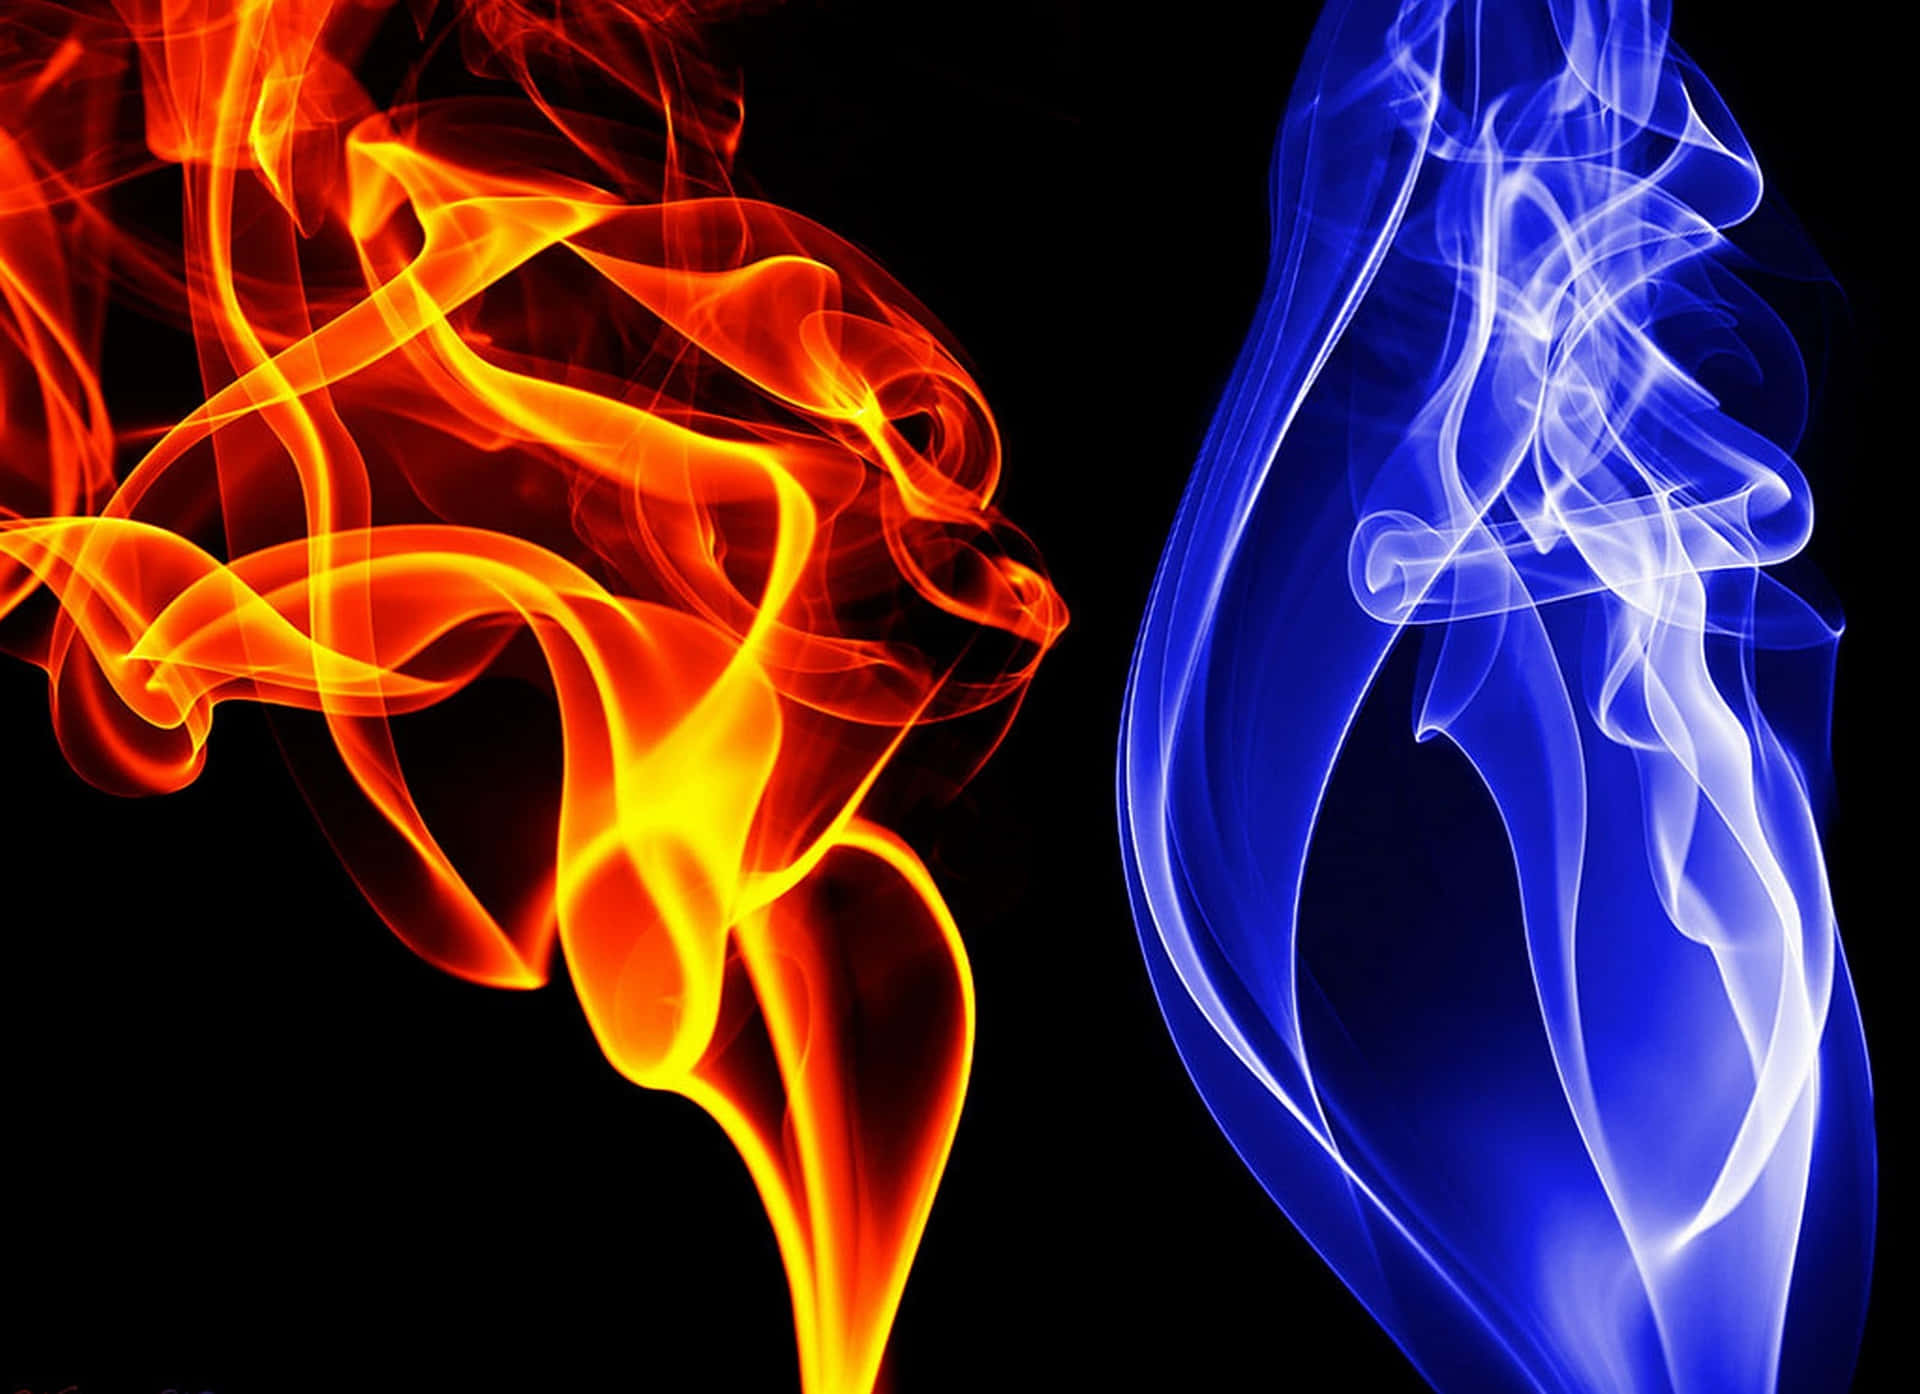 Red and Blue Fire Intensity Wallpaper